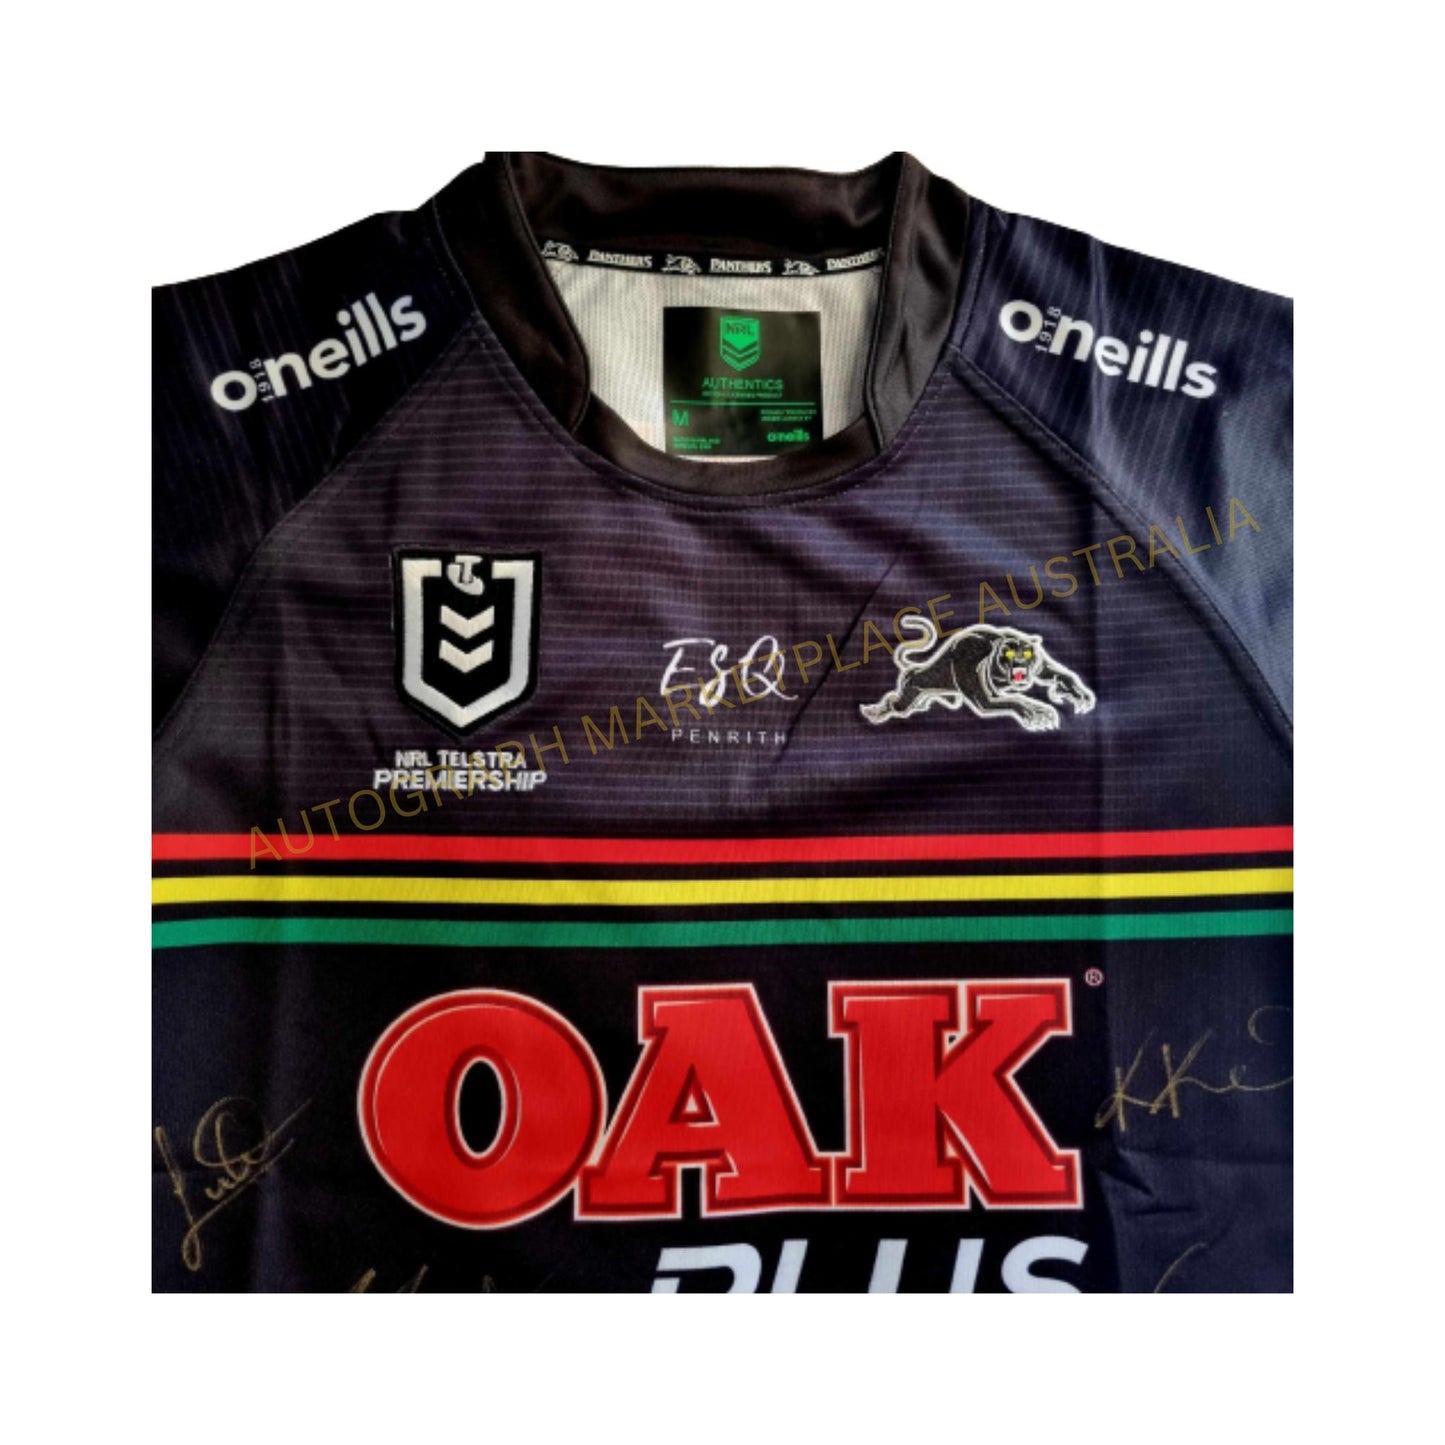 2021 Panthers Signed Jersey, NRL Memorabilia, Limited edition, collar side view